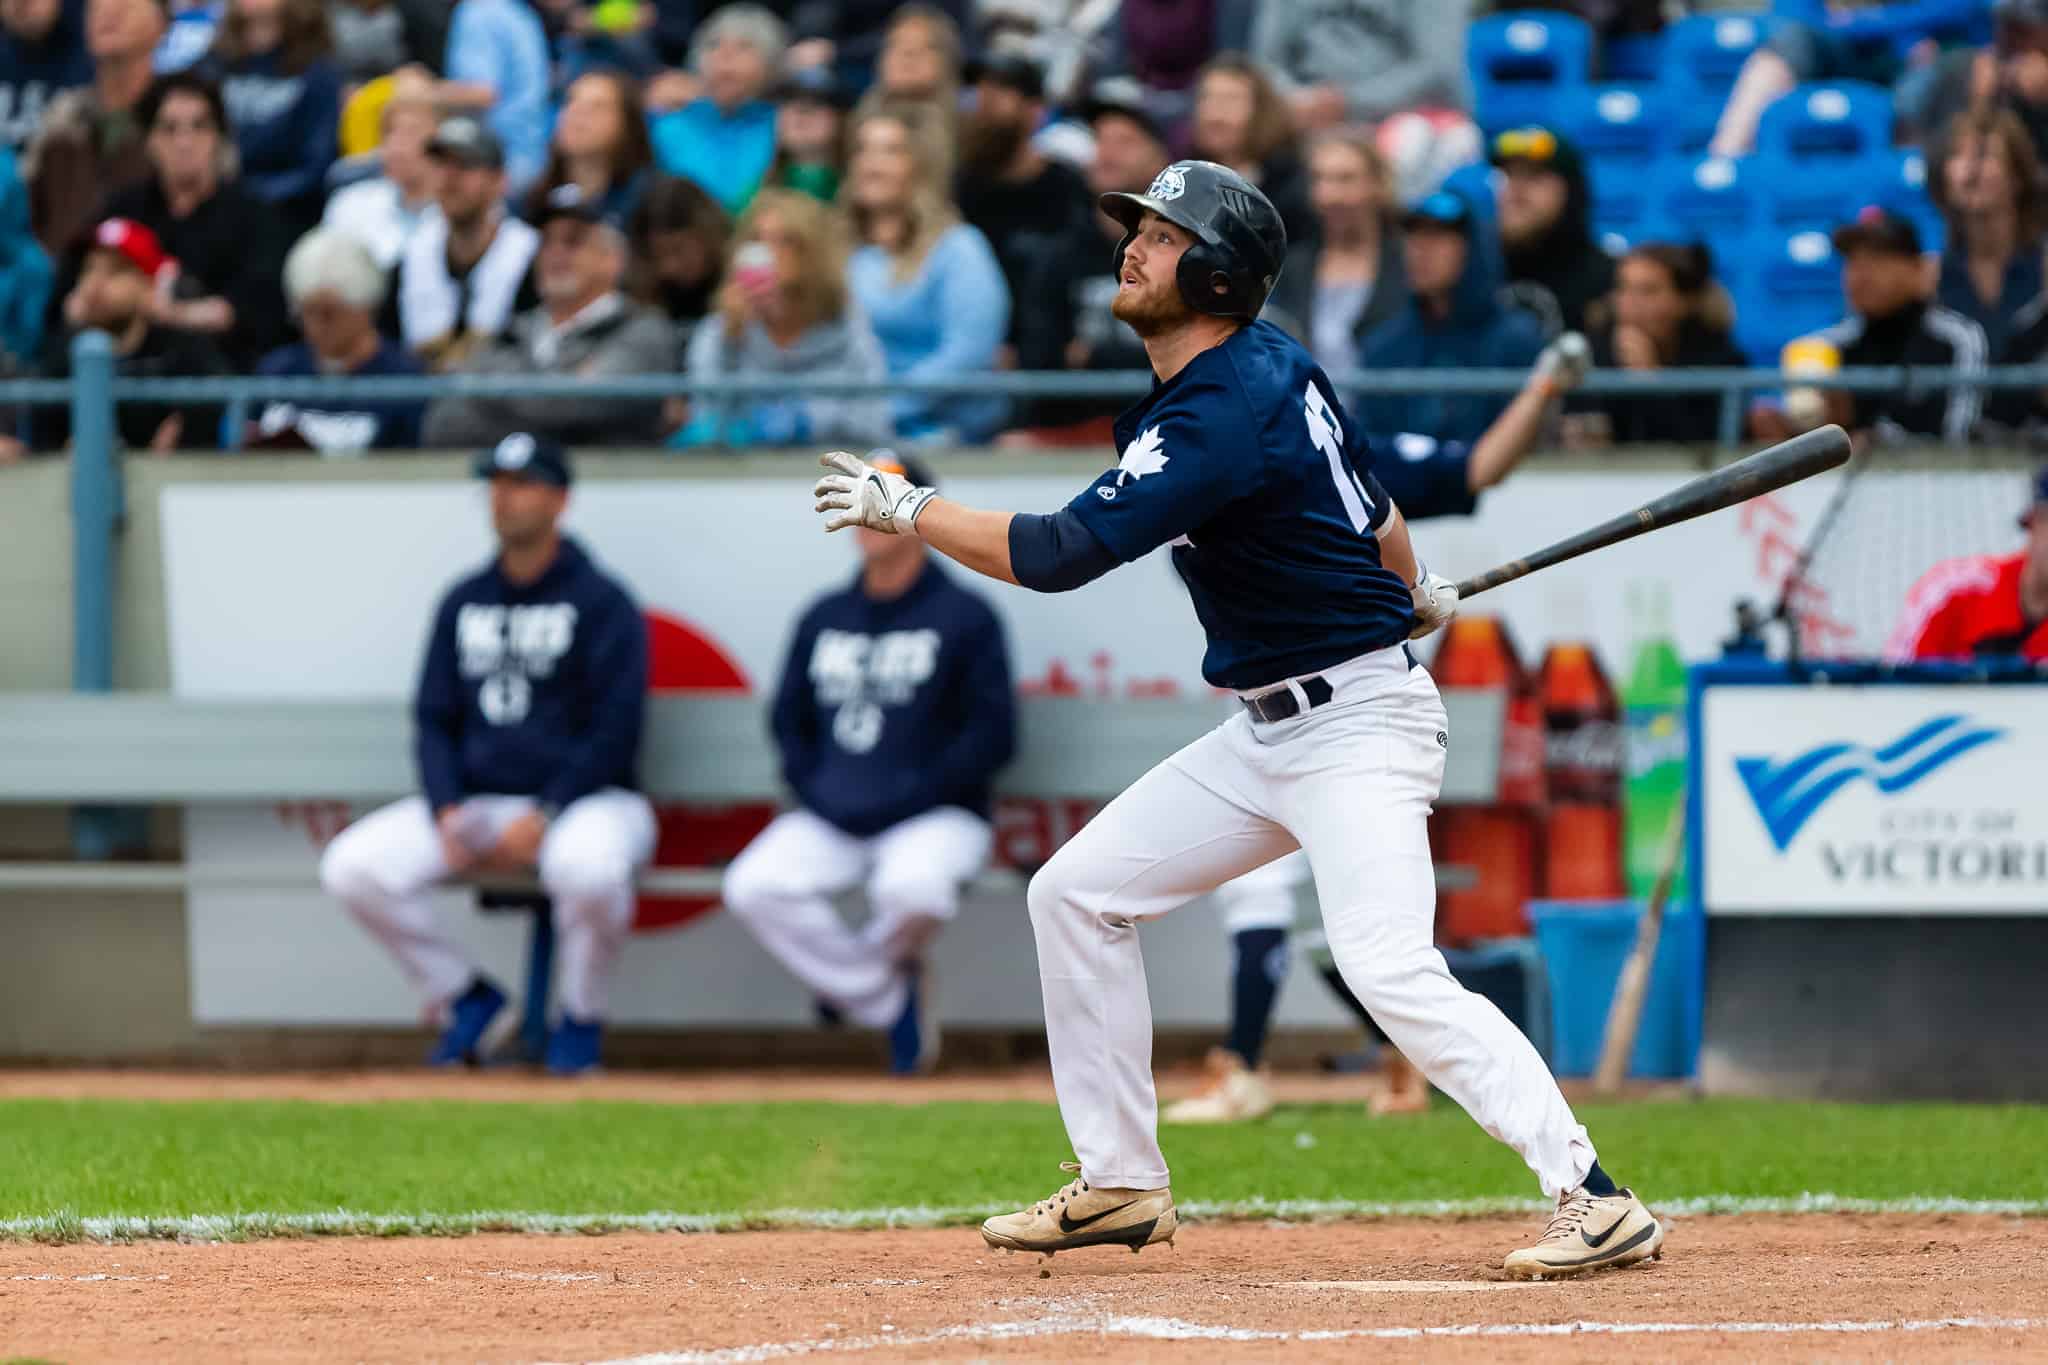 Niemann's five hits highlight HarbourCats series clinching victory in Wenatchee